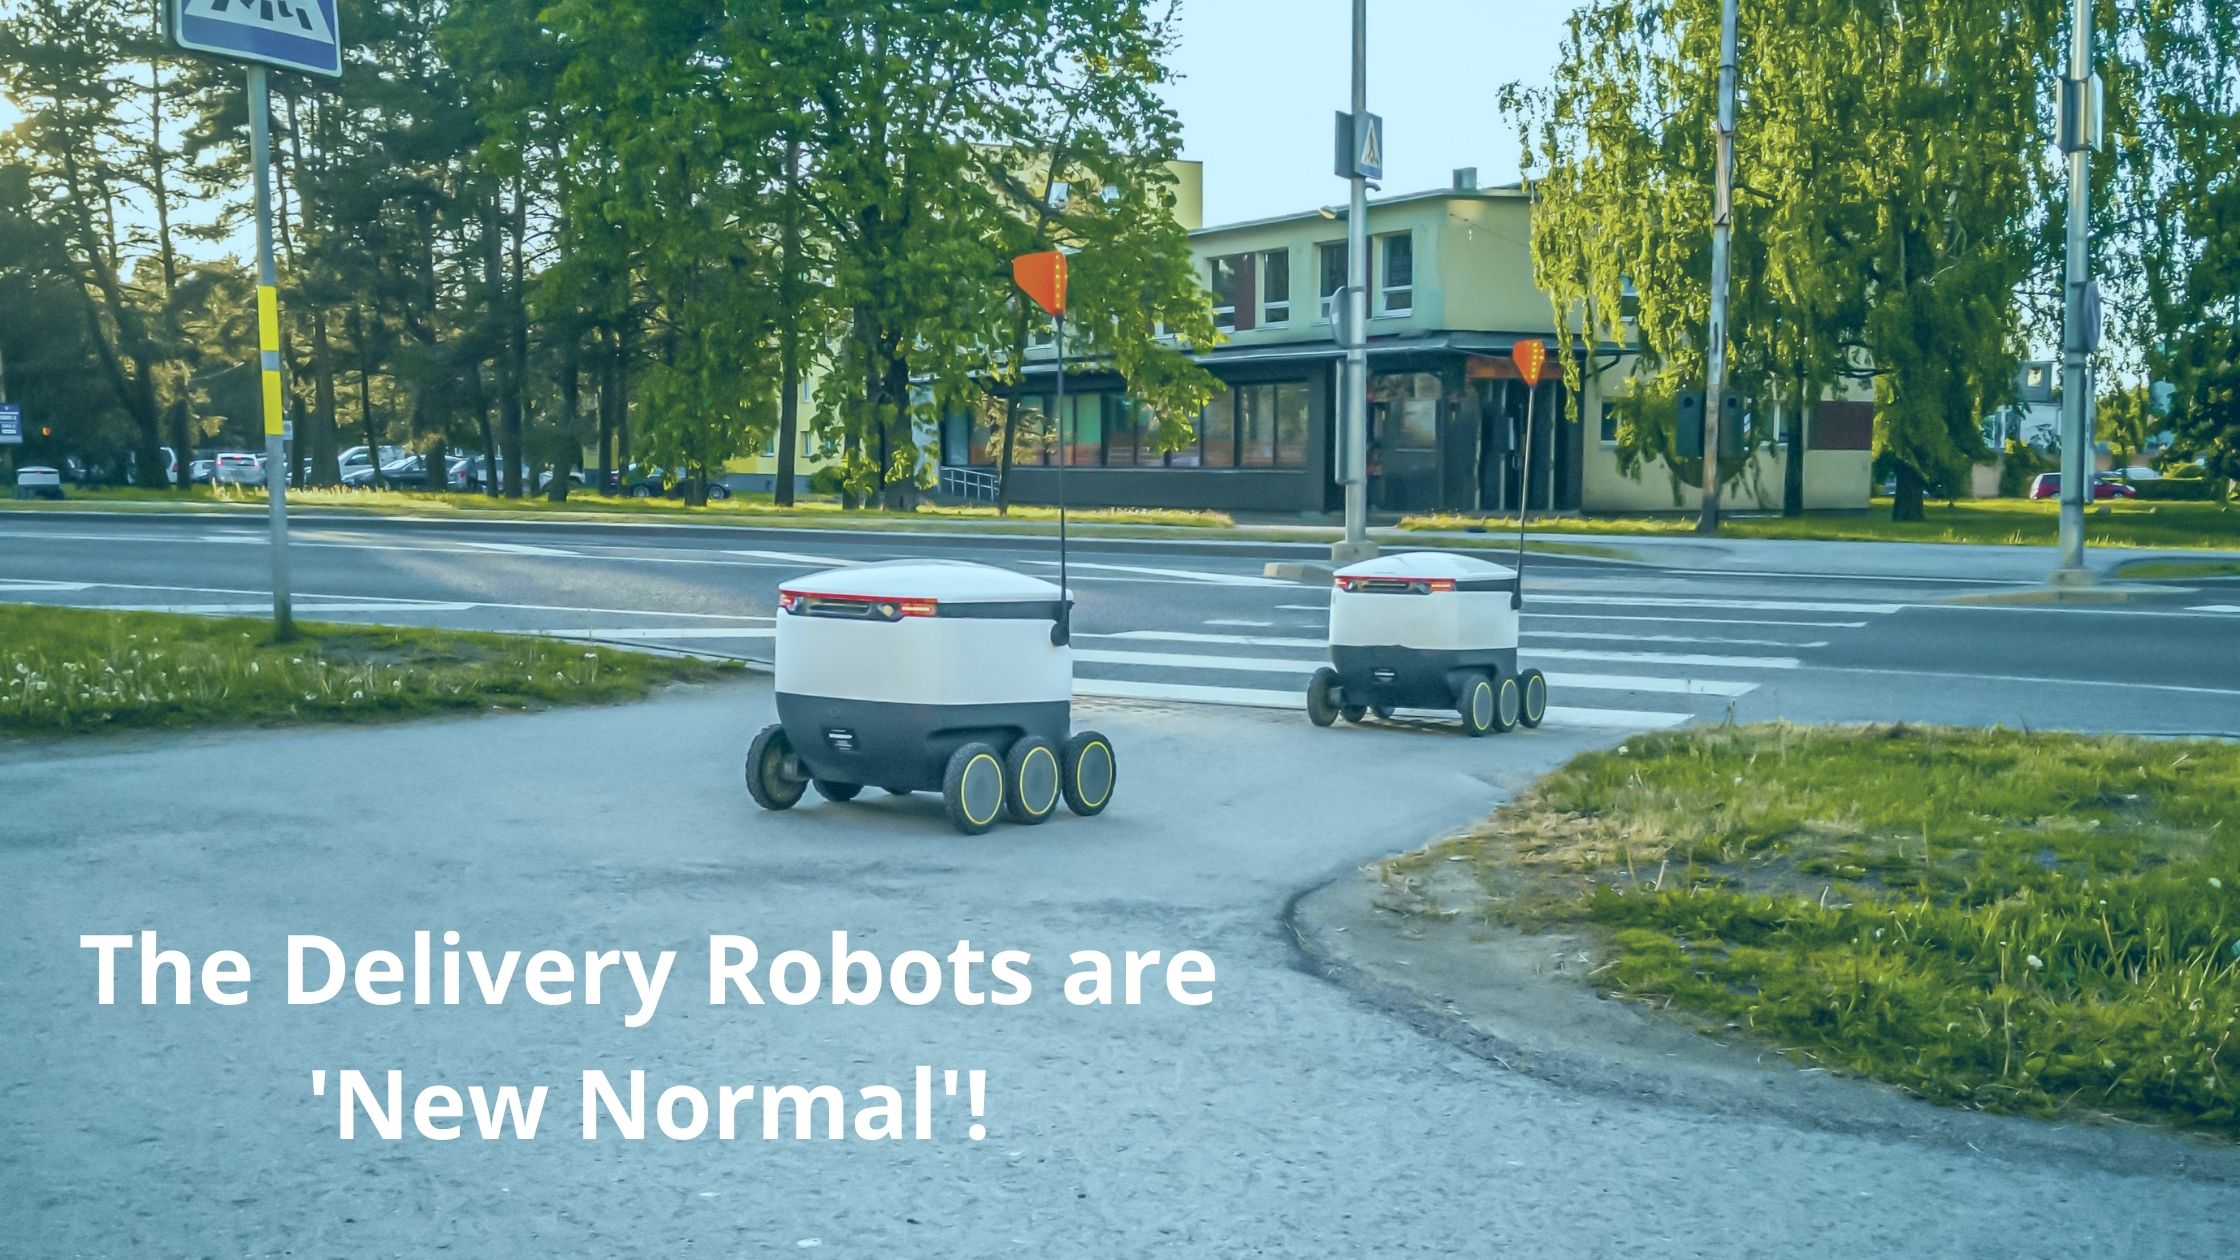 The Delivery Robots are ‘New Normal’!